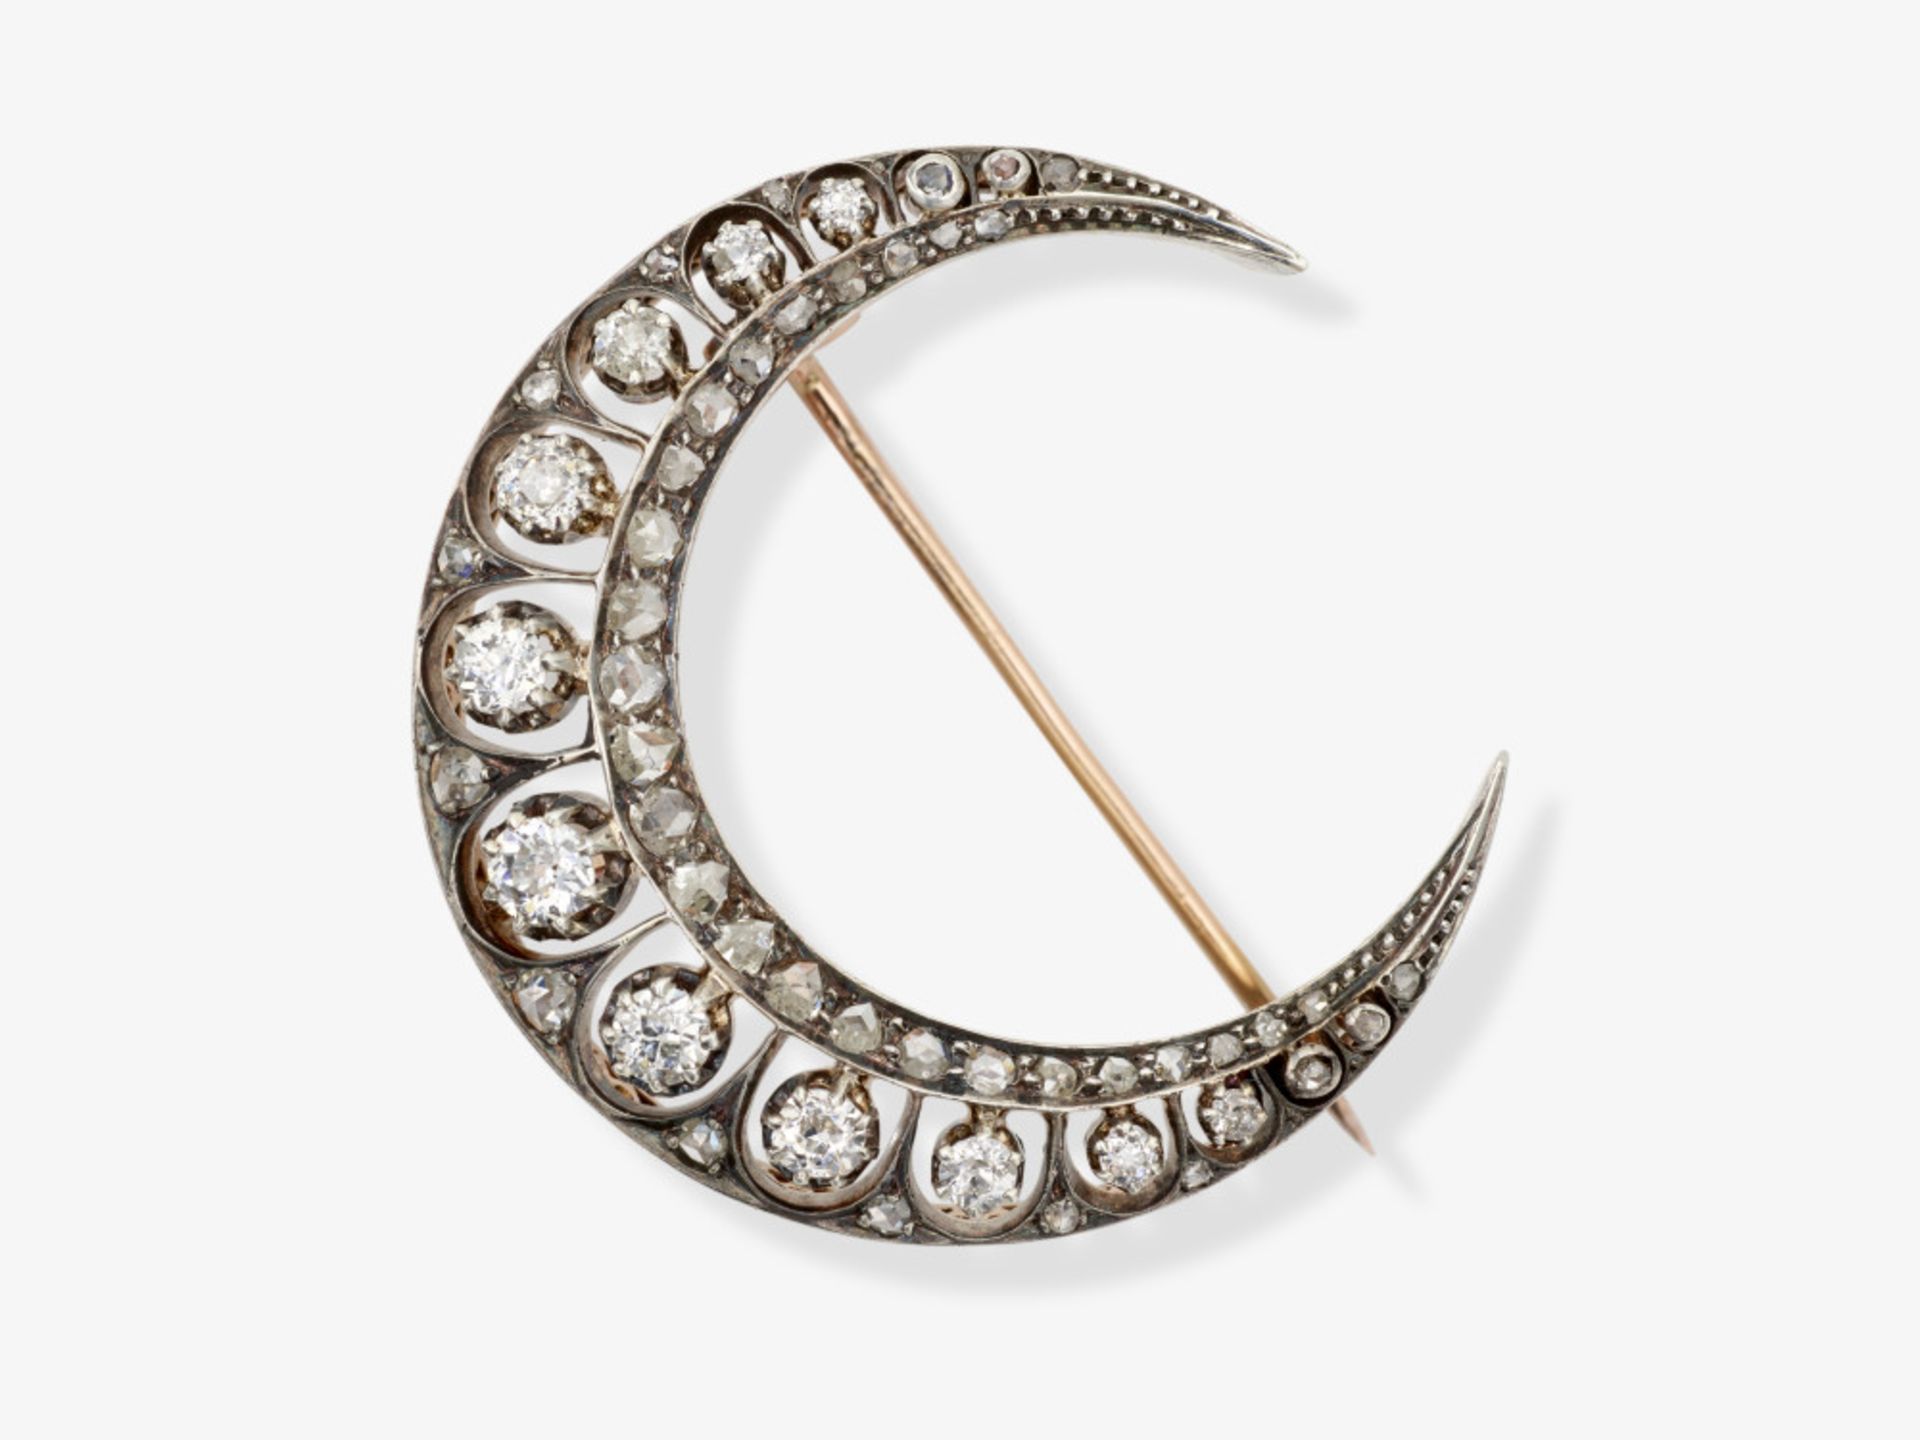 A crescent moon brooch with diamonds